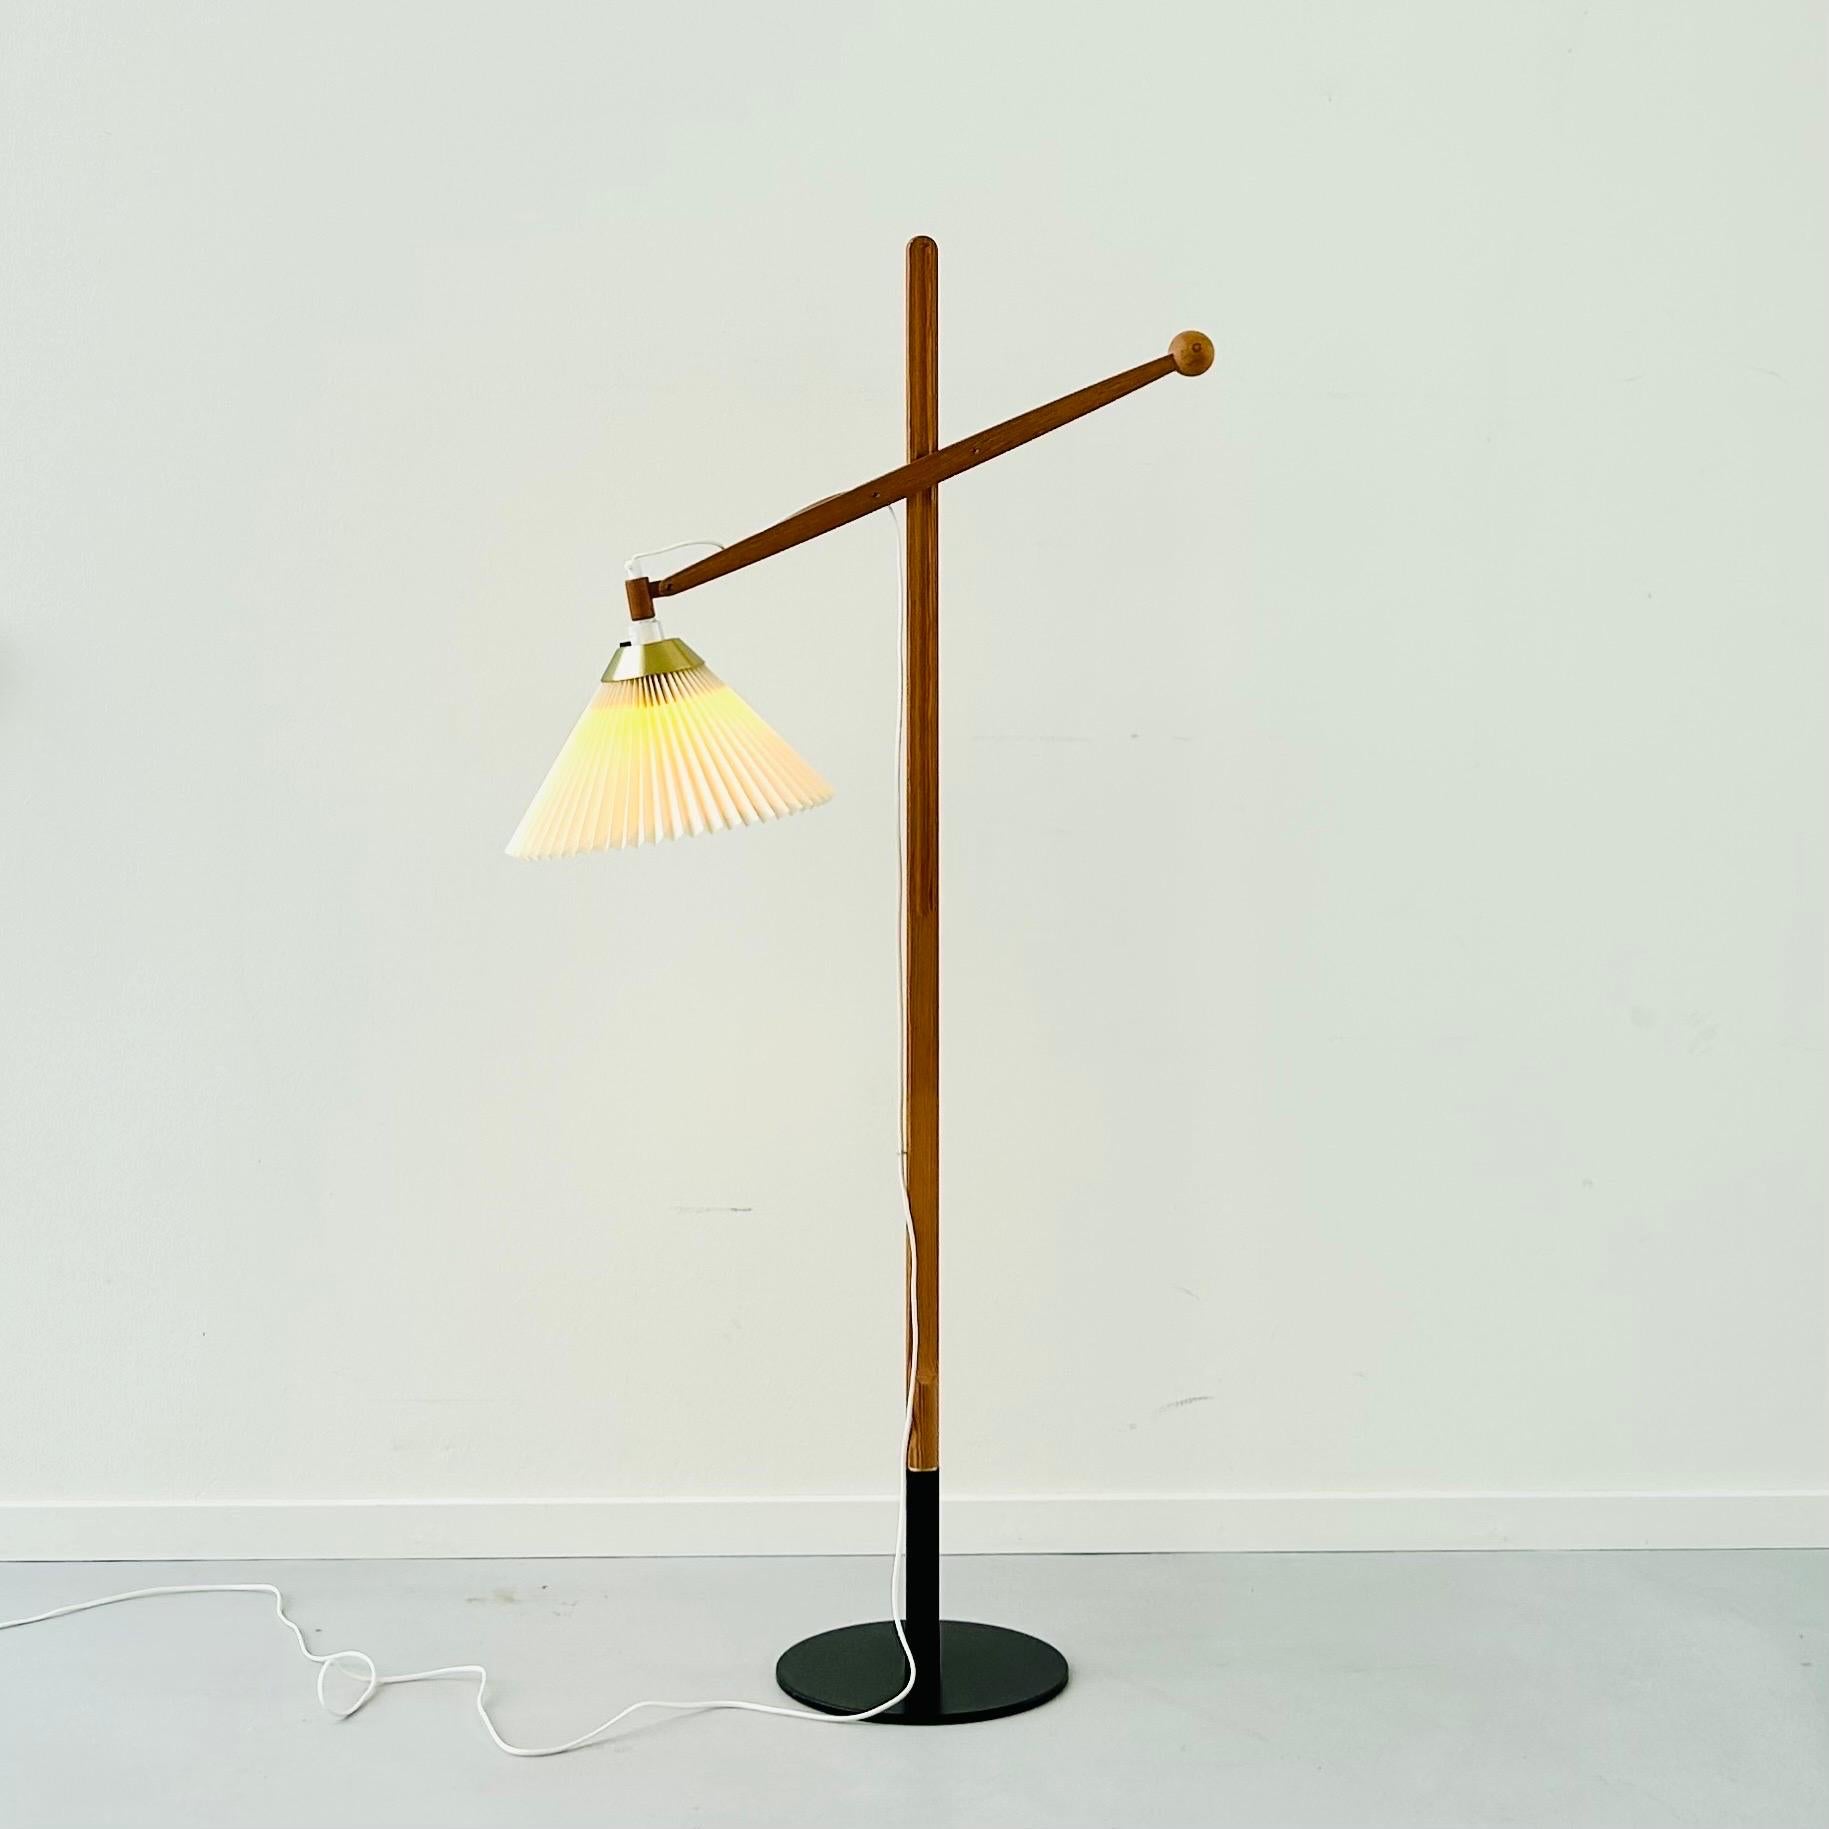 An iconic Danish Modern Le Klint 325 floor lamp designed by Vilhelm Wohlert in 1957 and crafted in Oregon pine. This particular vintage version is from the 1960s have had one owner, and is in perfect condition. It has practically no marks and come